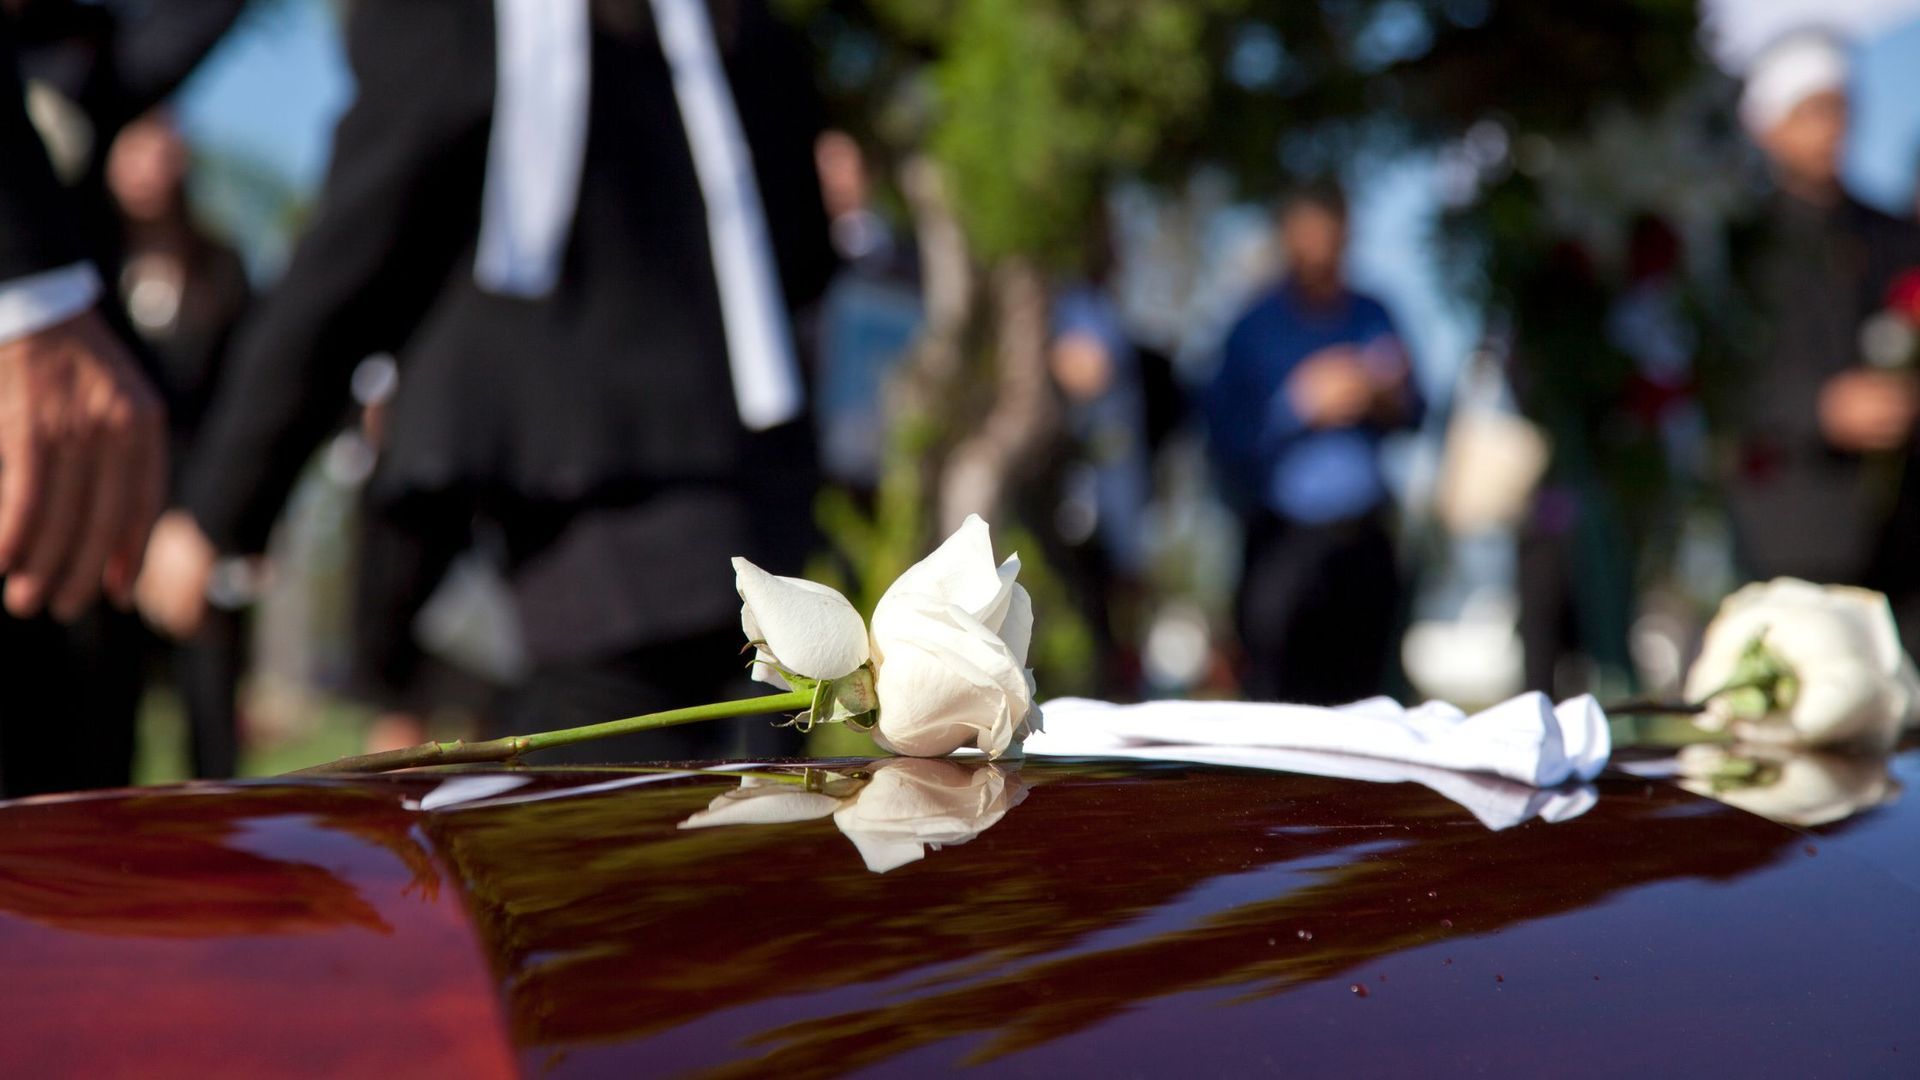 White rose resting on top of a casket at a funeral with people in the background